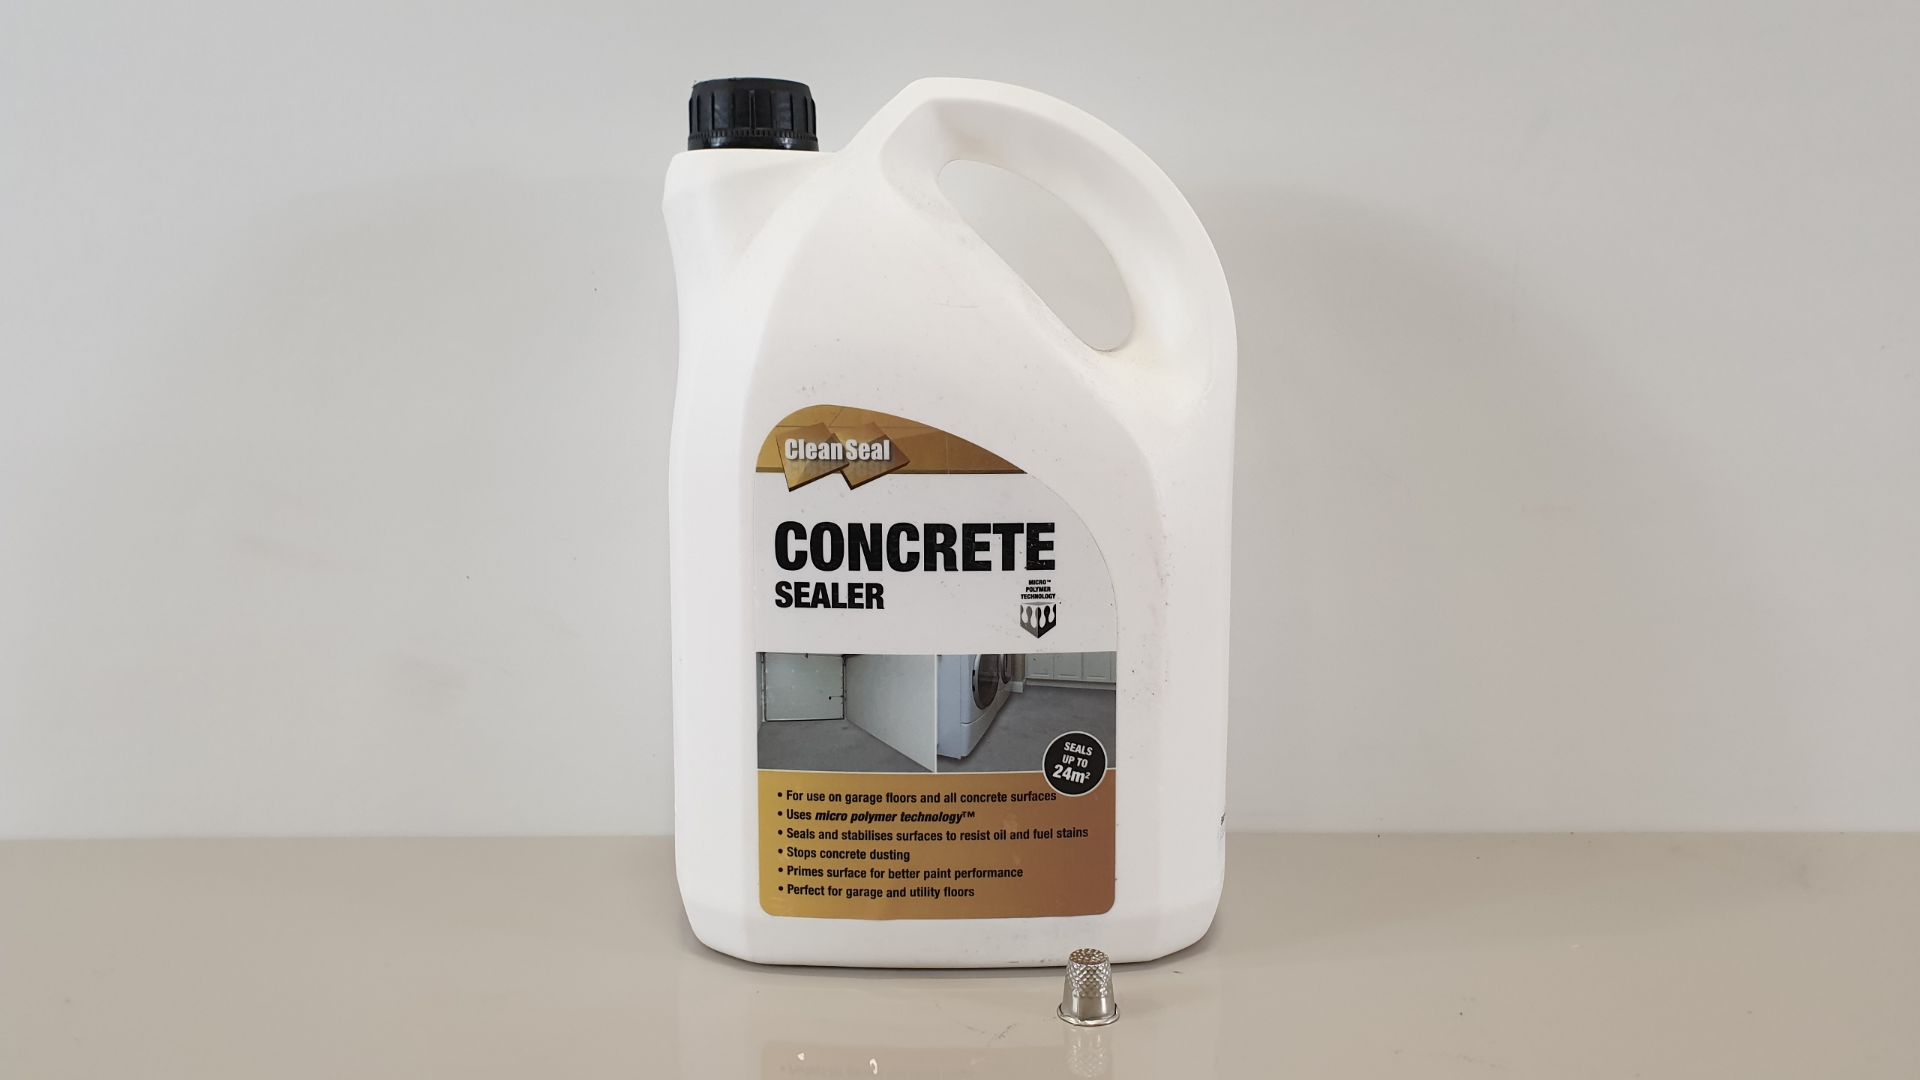 16 X 4 LITRE CLEANSEAL CONCRETE SEALER - IN 4 CARTONS (EACH CLEANS UP TO 24 M/2)